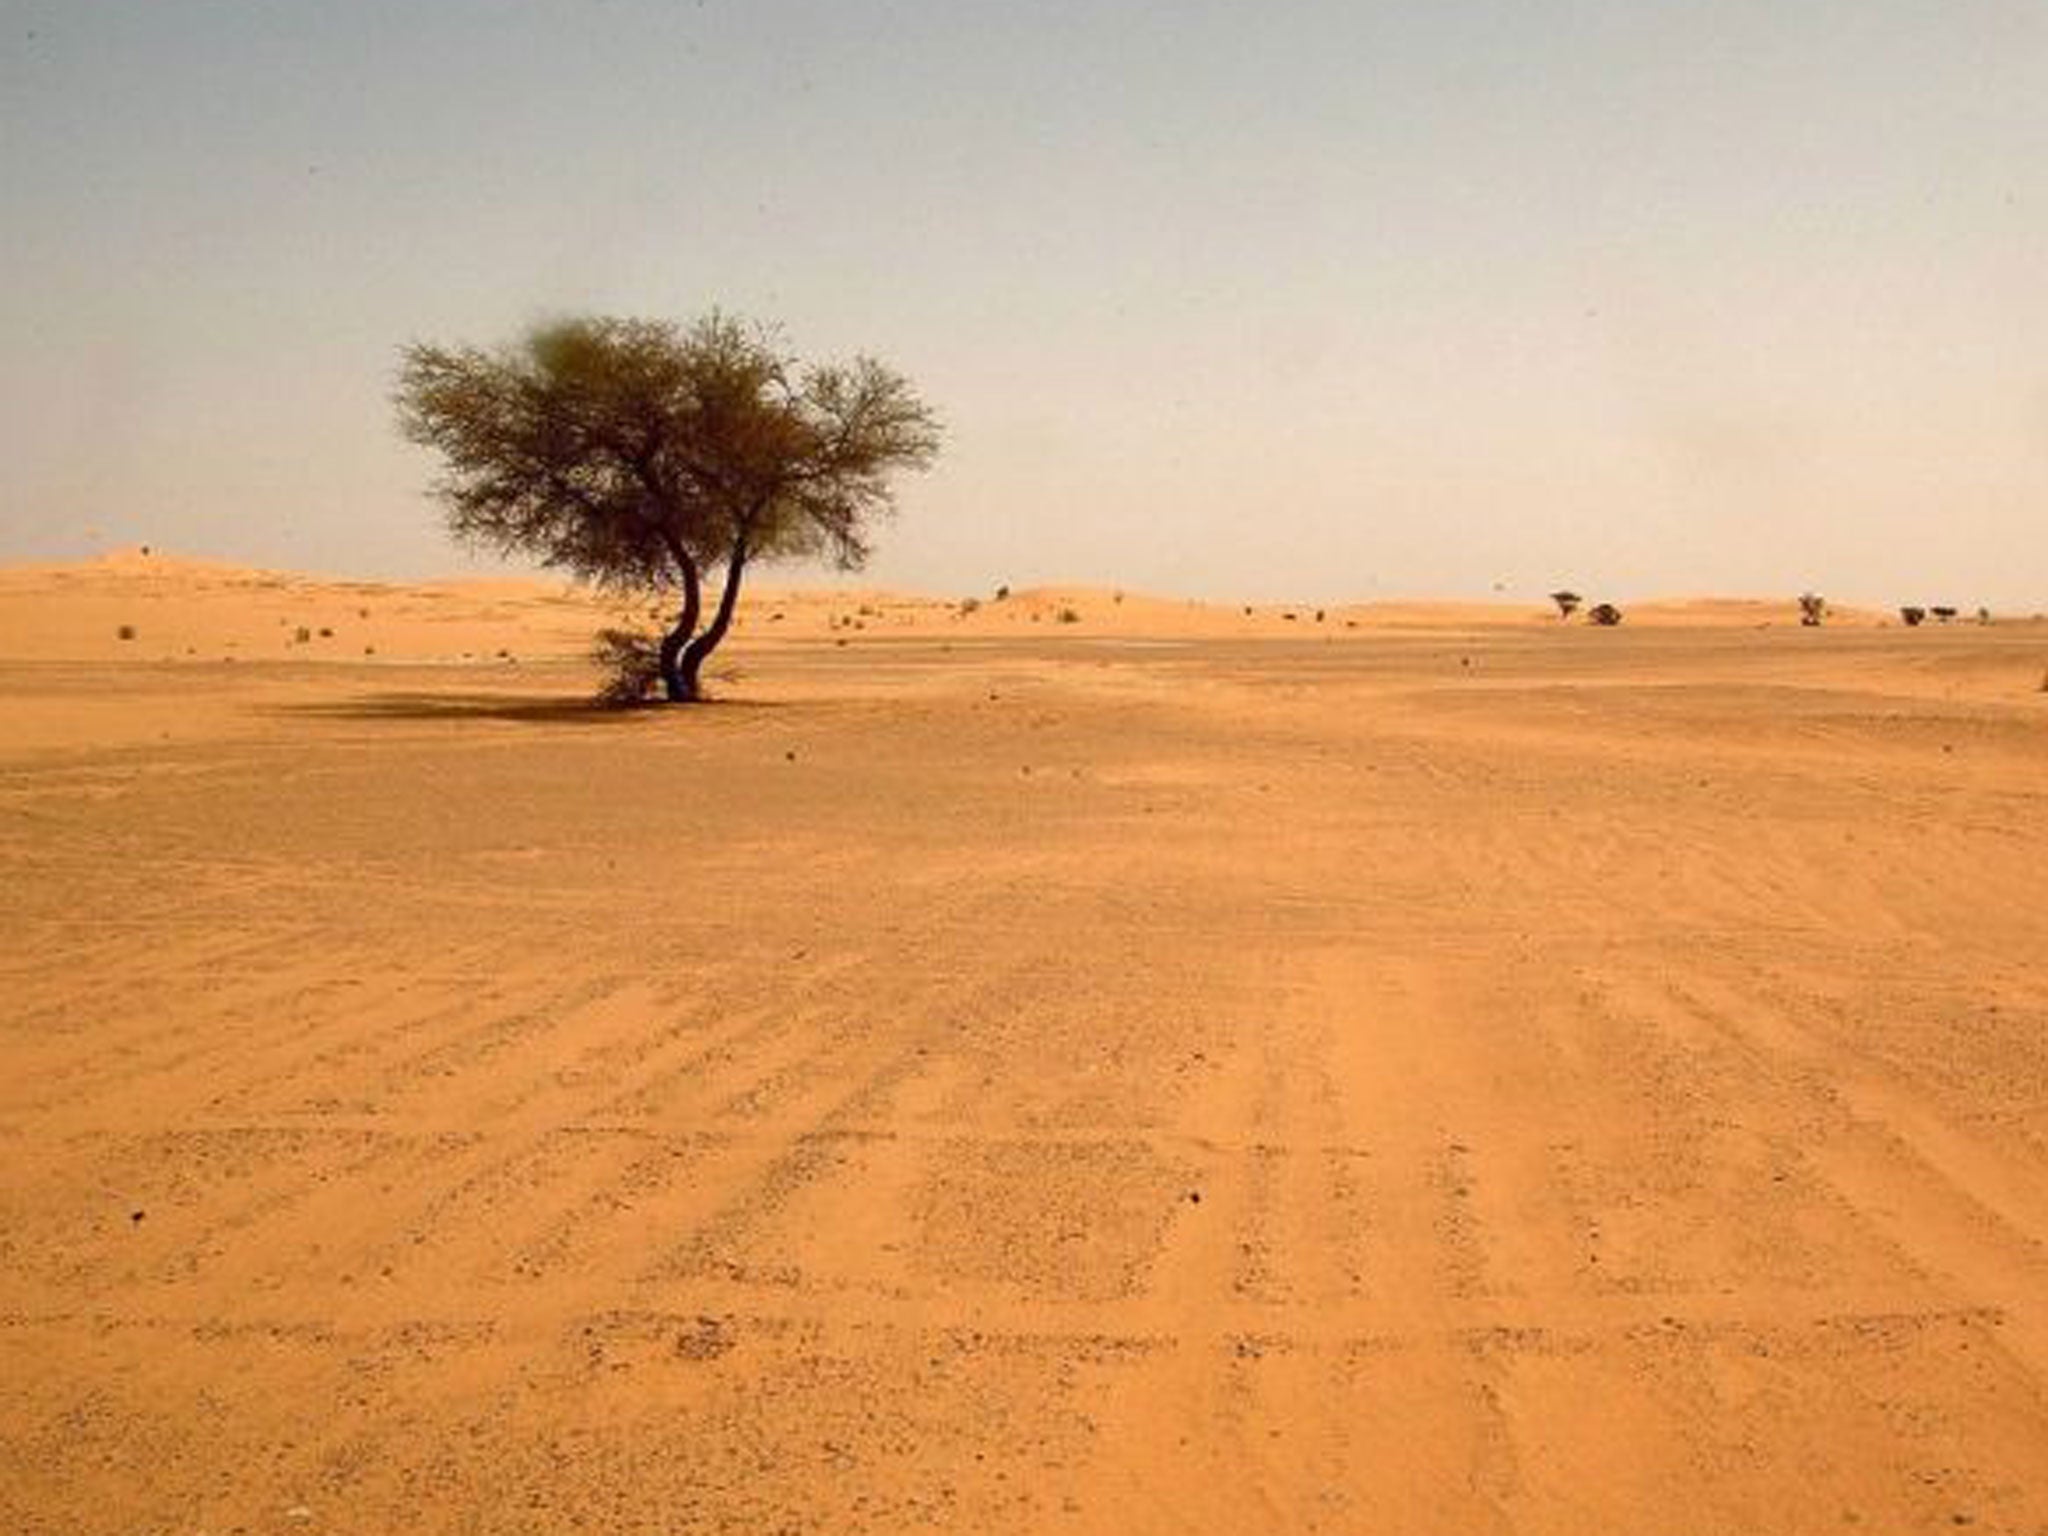 The Sahara Desert covers 10 per cent of the African continent 